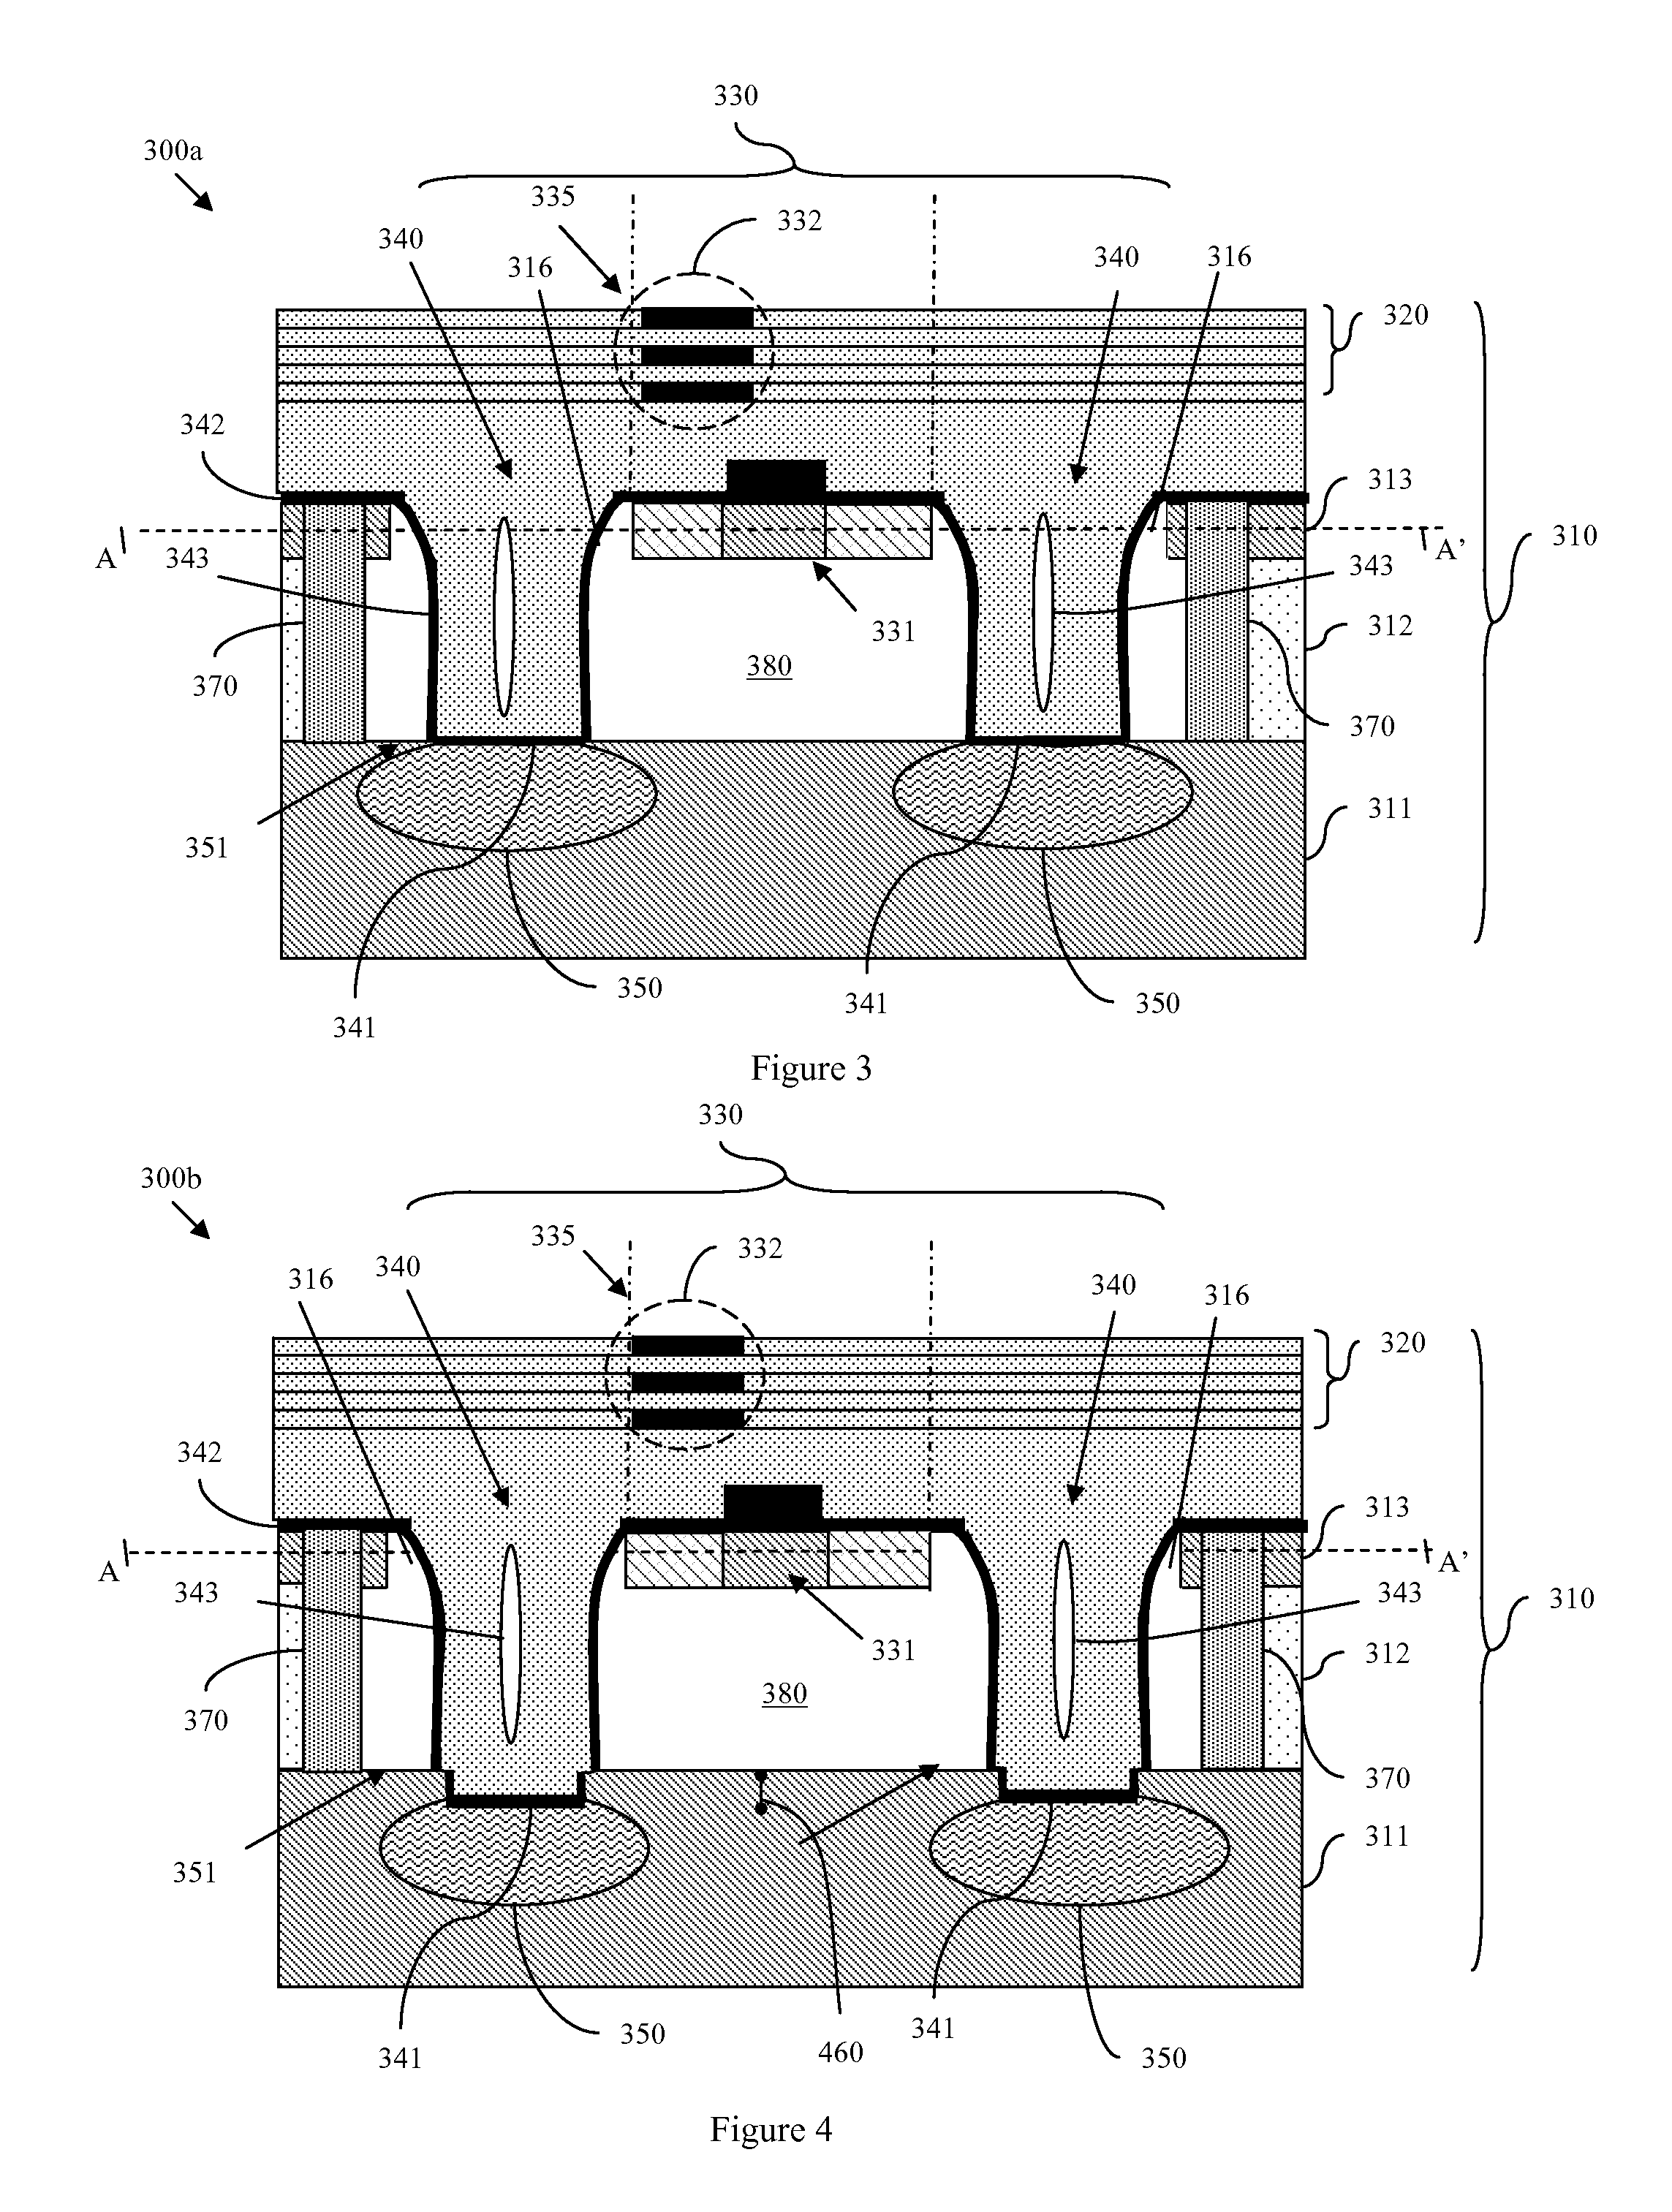 Integrated Circuit Structure, Design Structure, and Method Having Improved Isolation and Harmonics